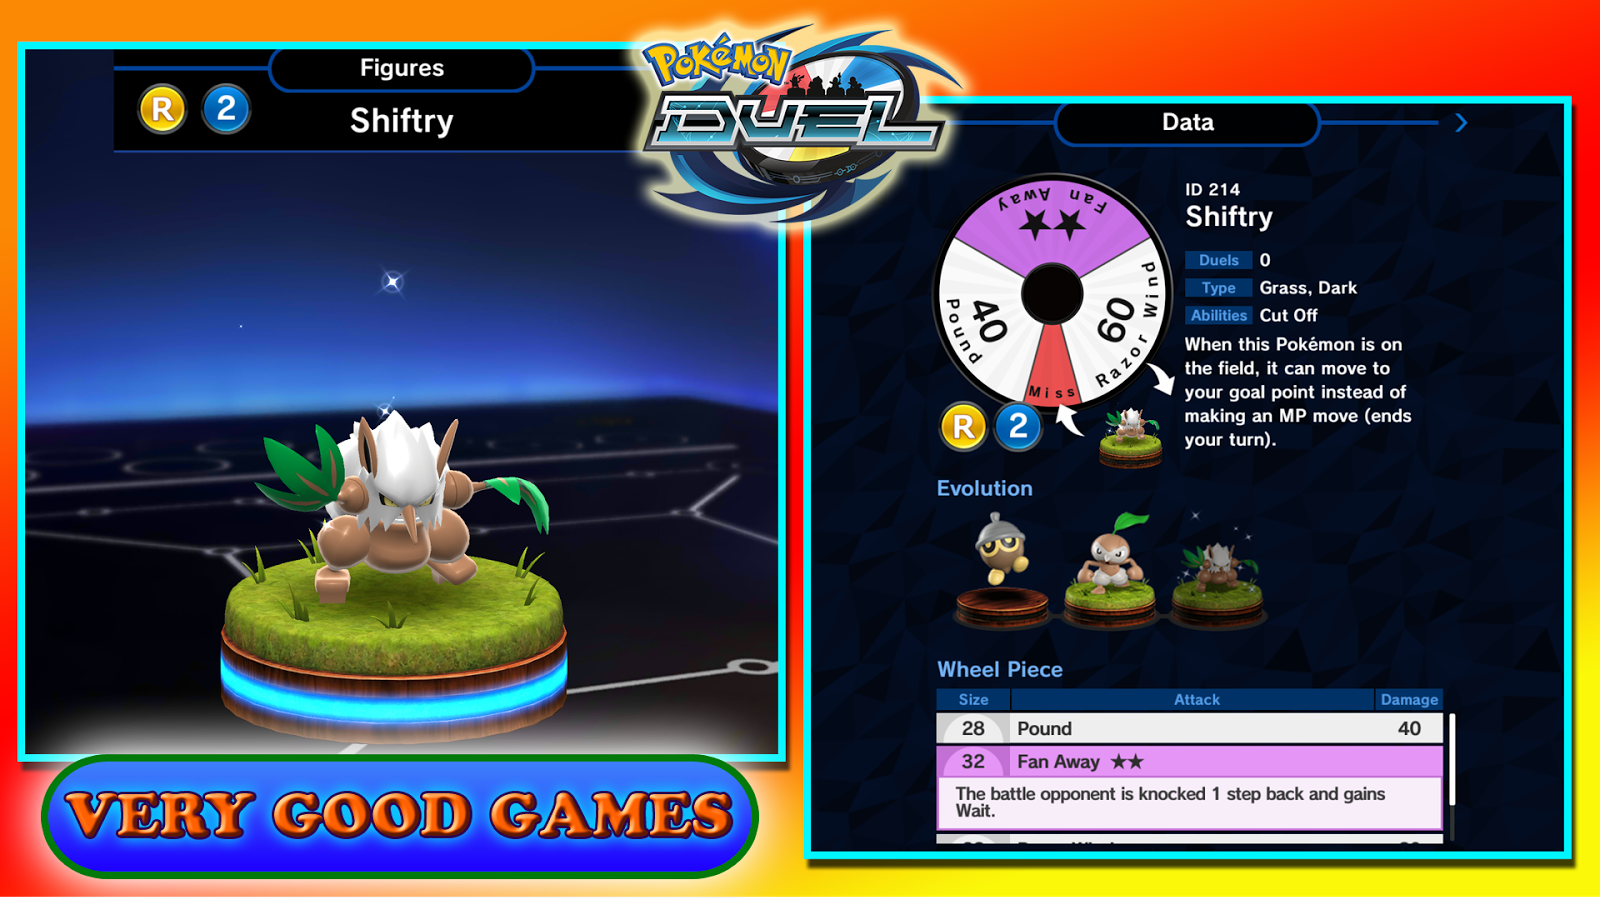 Shiftry - Pokemon for Grass Gym Cup in Pokemon Duel